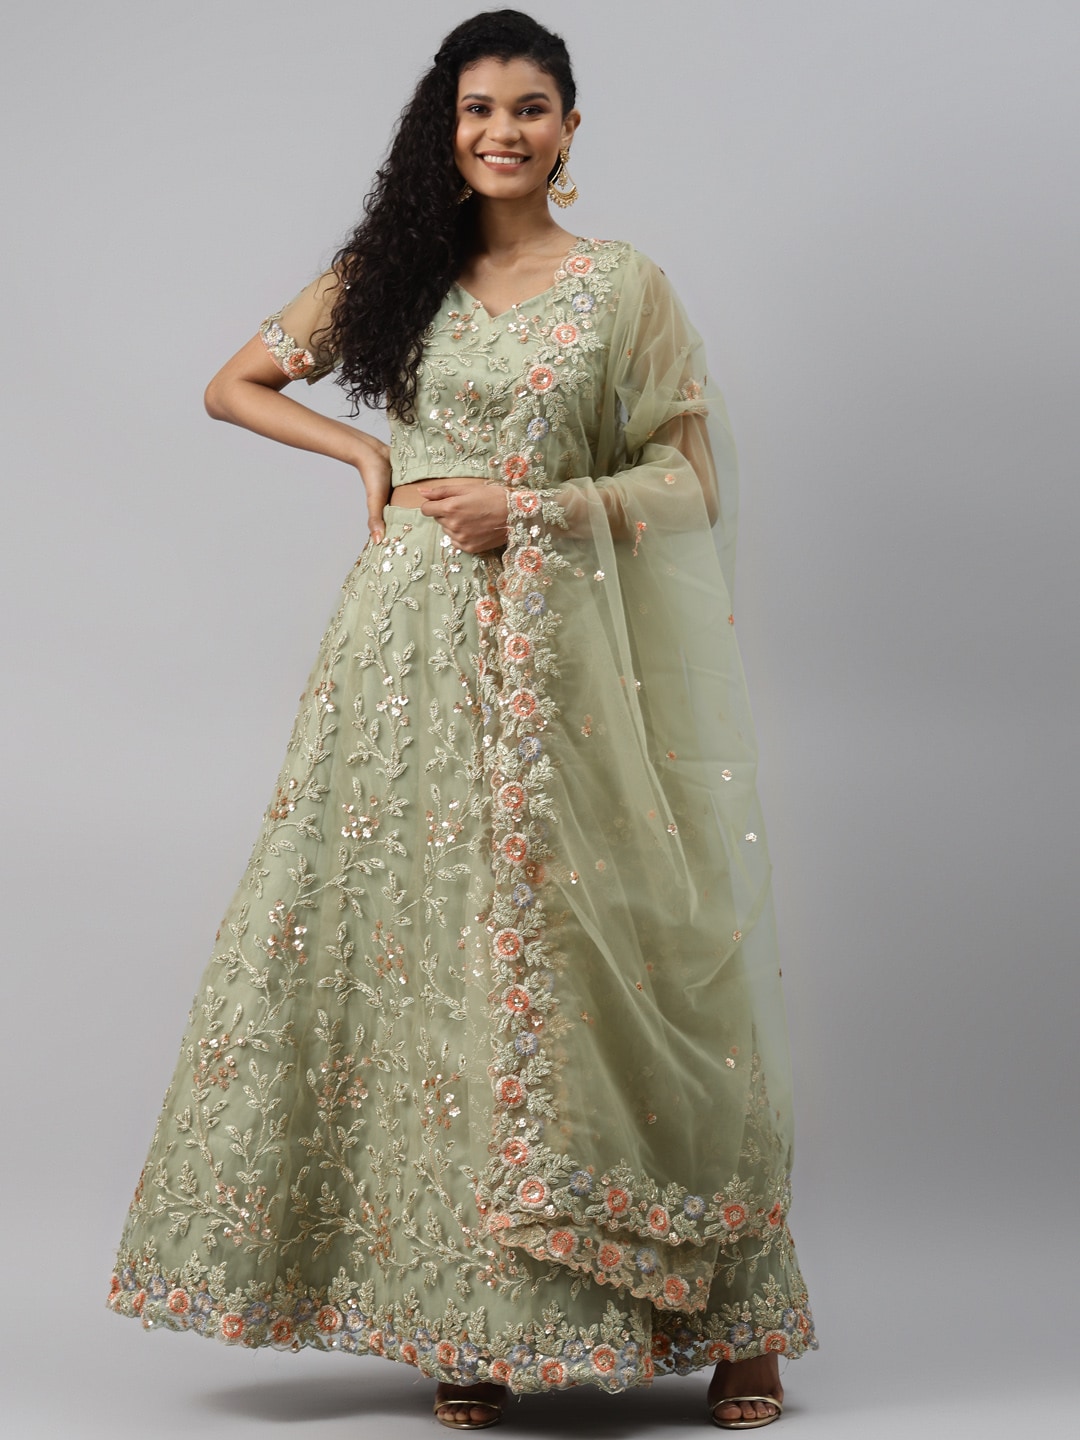 Readiprint Fashions Green & Peach-Colored Semi-Stitched Lehenga & Blouse with Dupatta Price in India